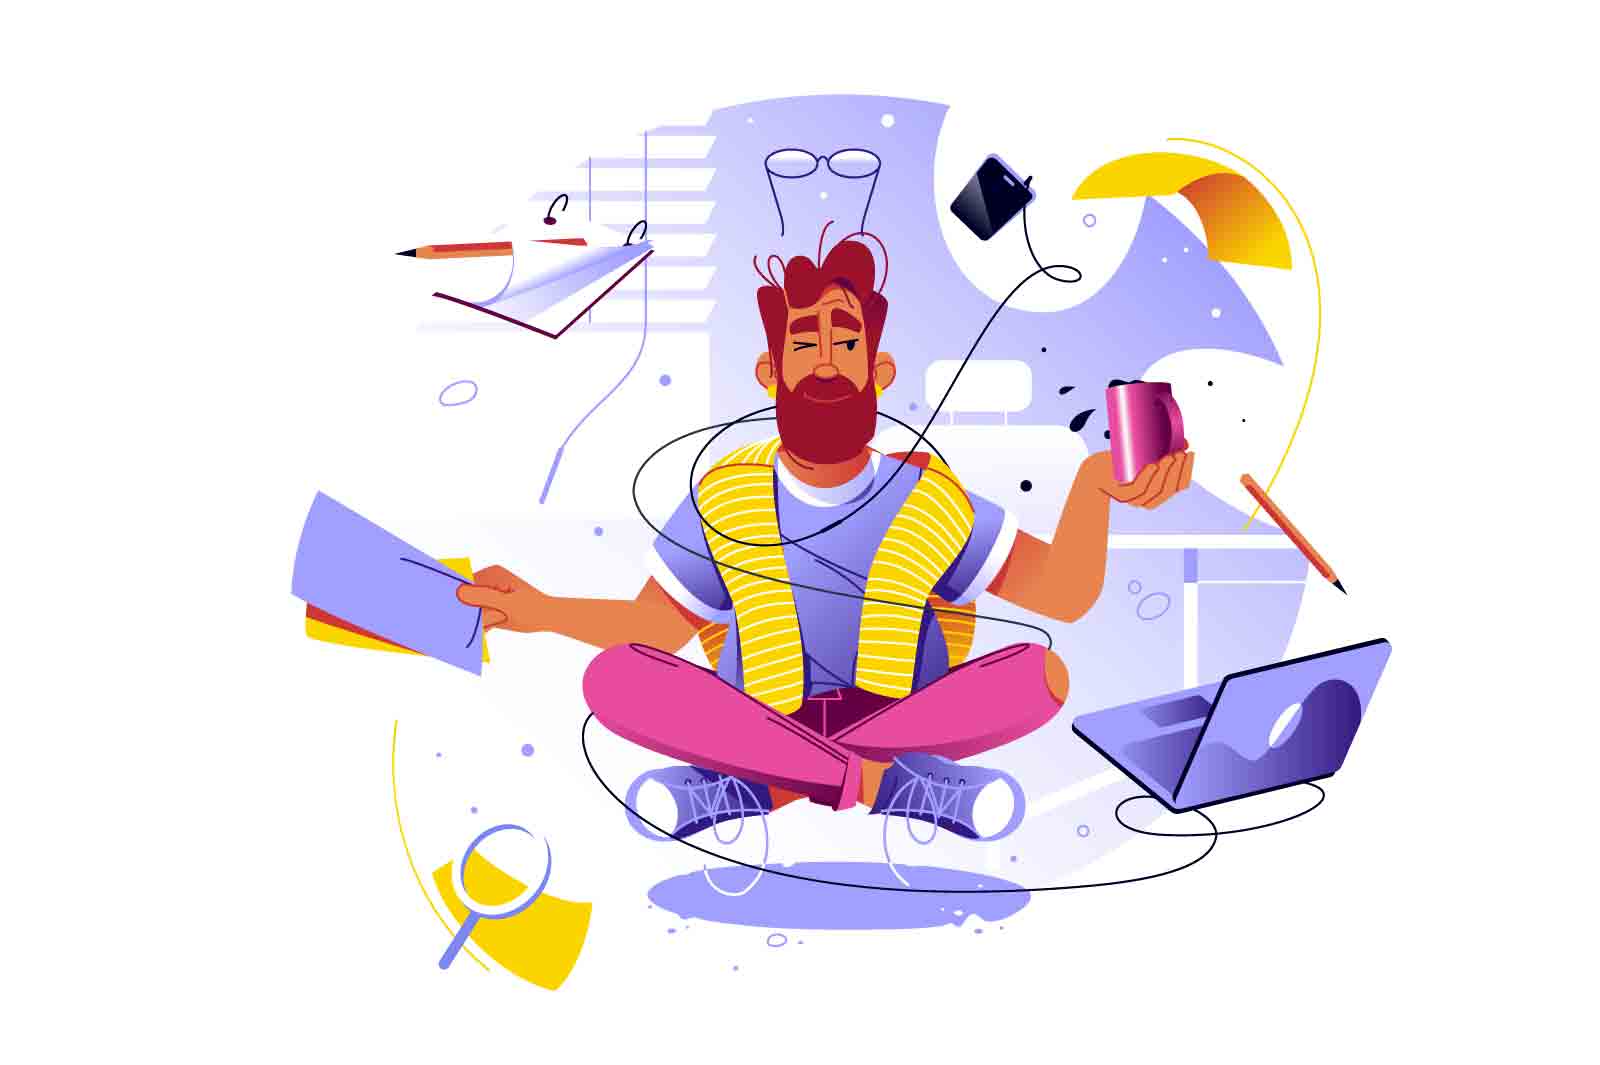 Man meditation at work vector illustration. Businessman meditate, zen and chilling. Business relax. Relaxing in office, no stress recent flat concept